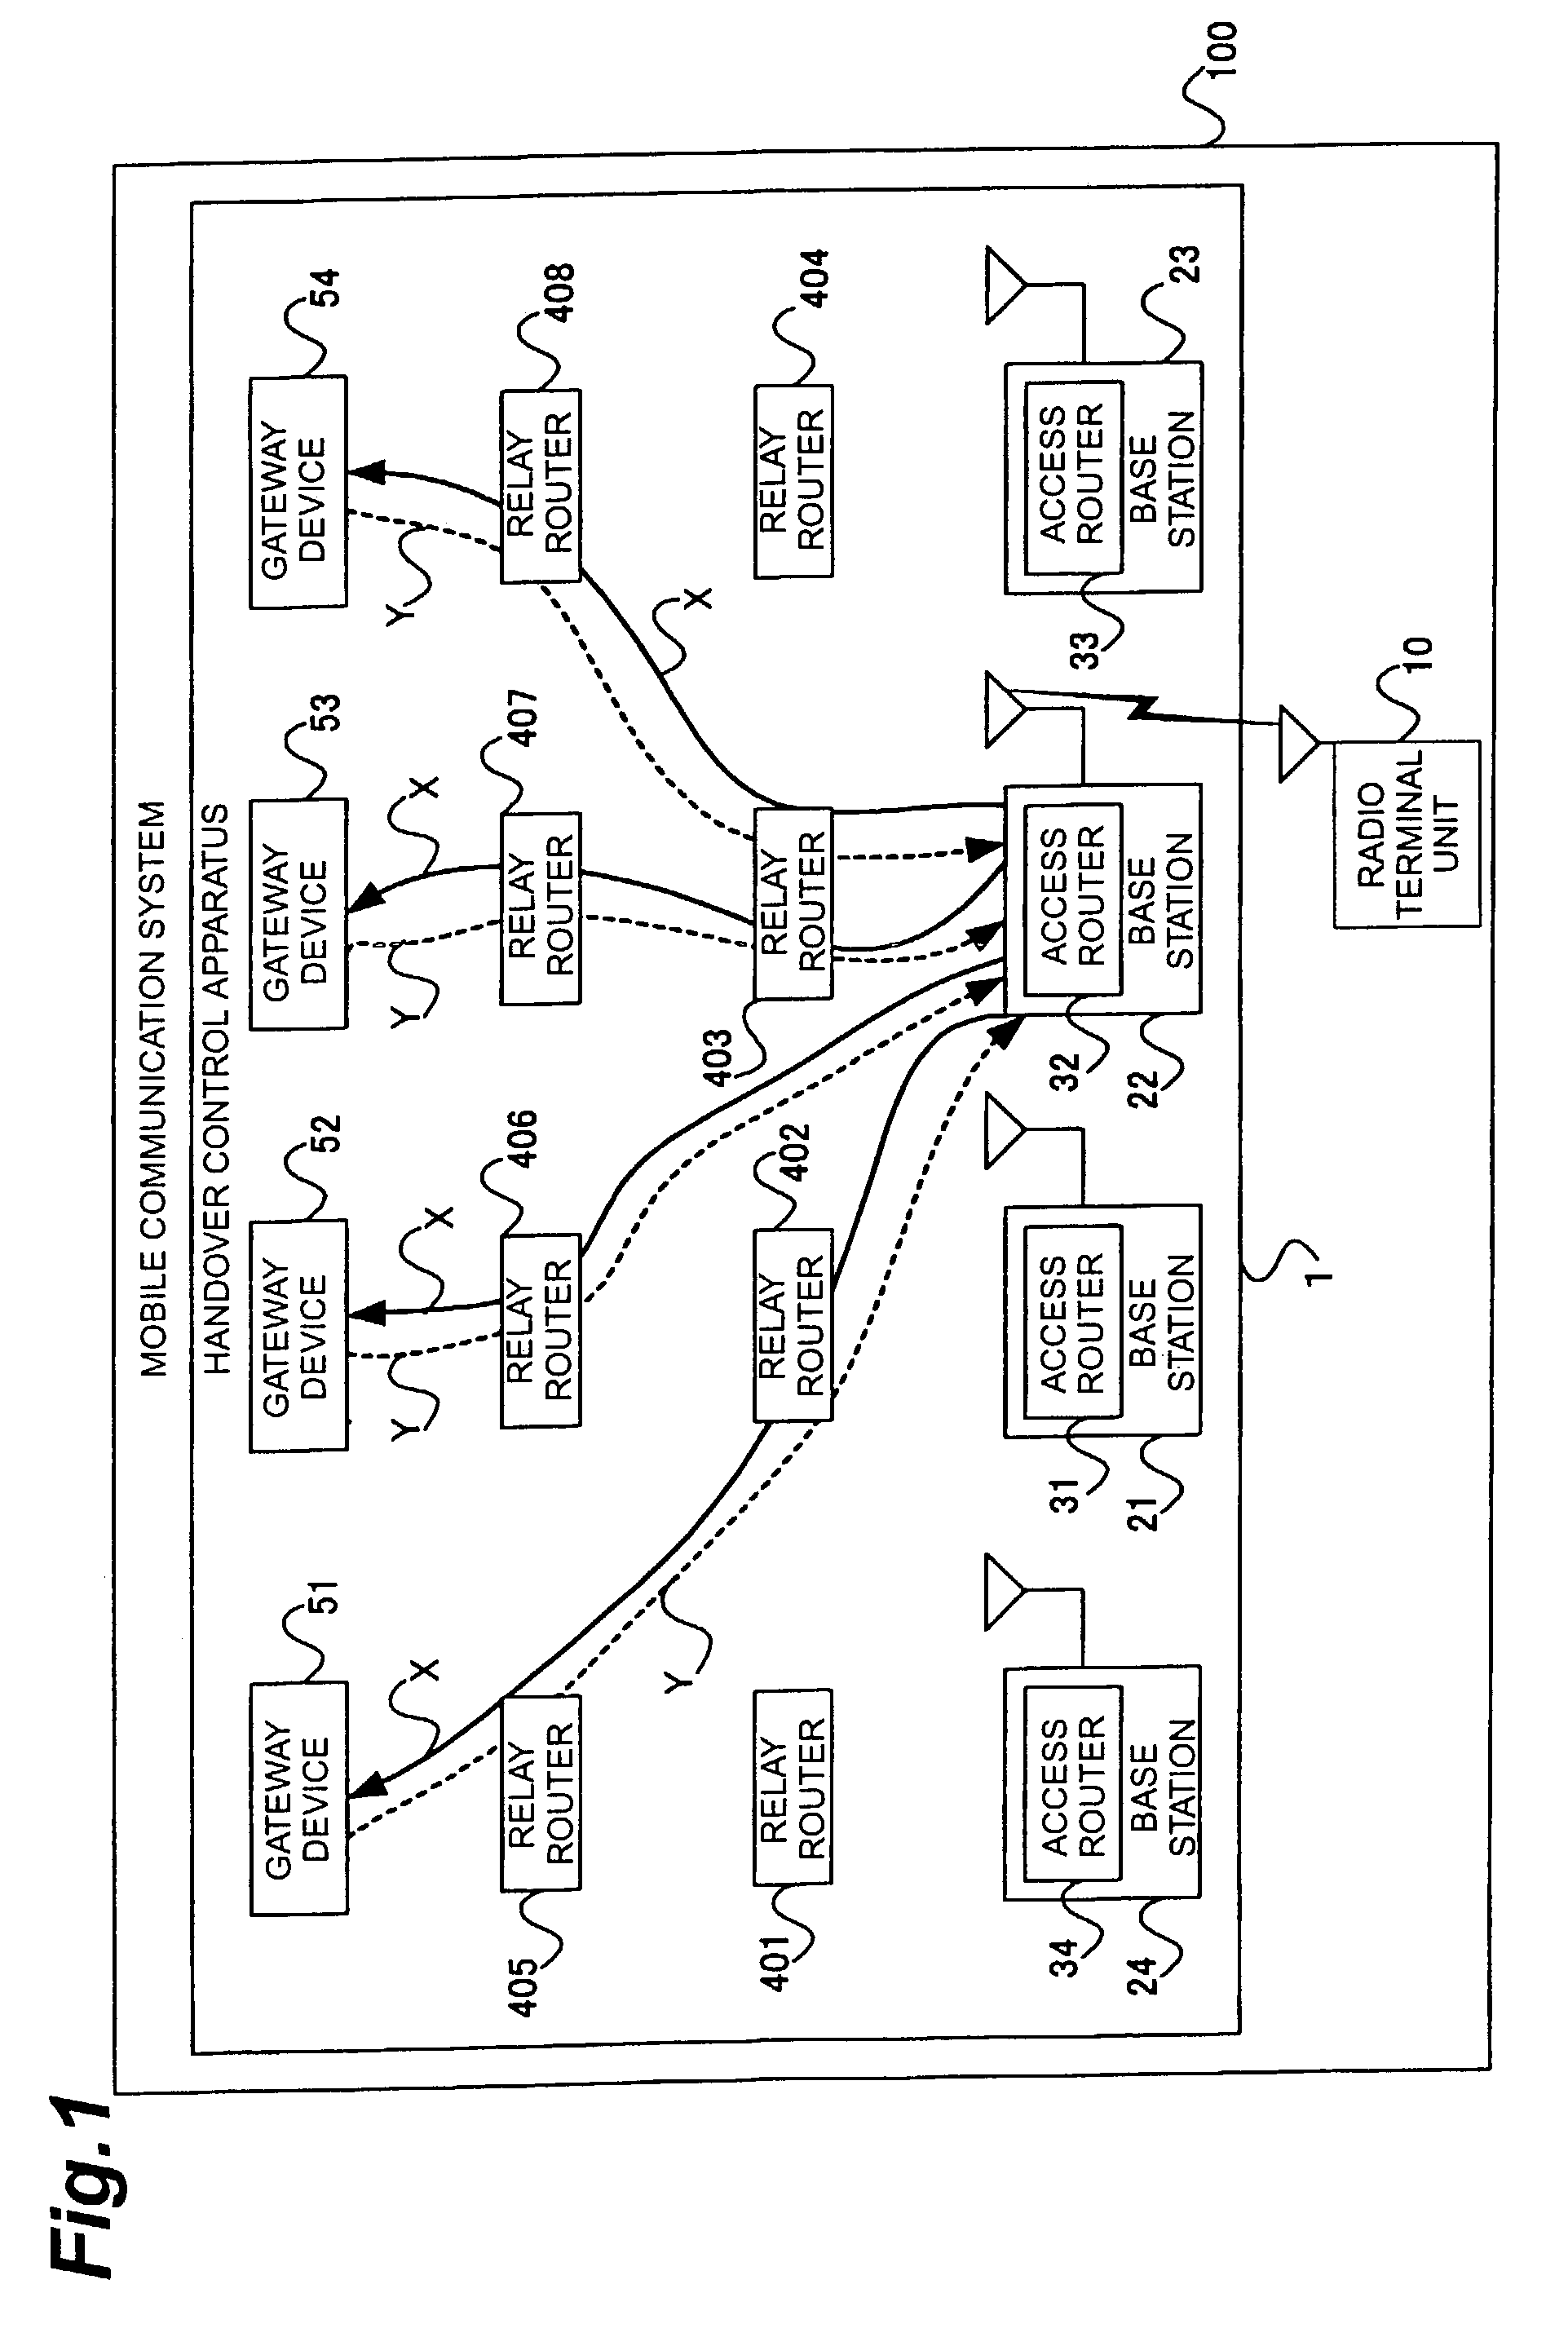 Handover control apparatus, relay router, gateway apparatus, access router base station, mobile communication system, and handover control method